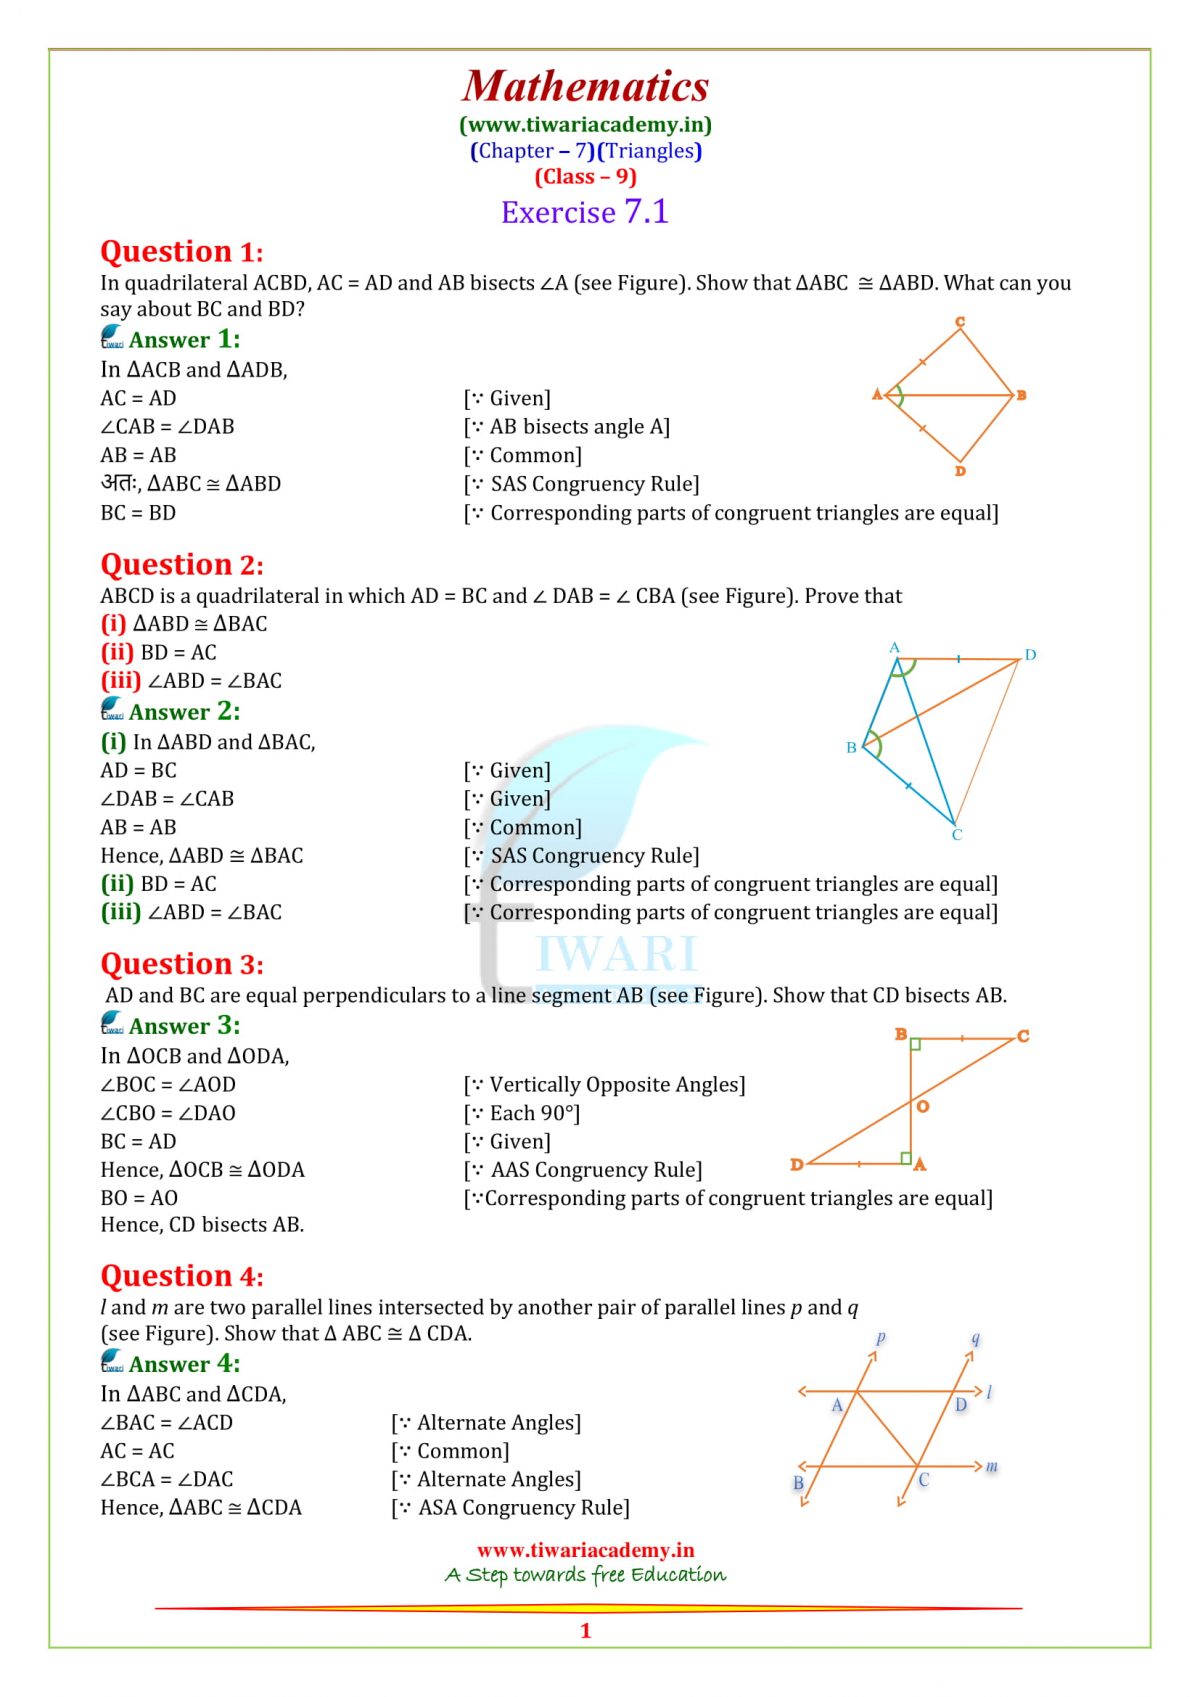 ncert-solutions-for-class-9-maths-chapter-7-triangles-exercise-7-1-7-5